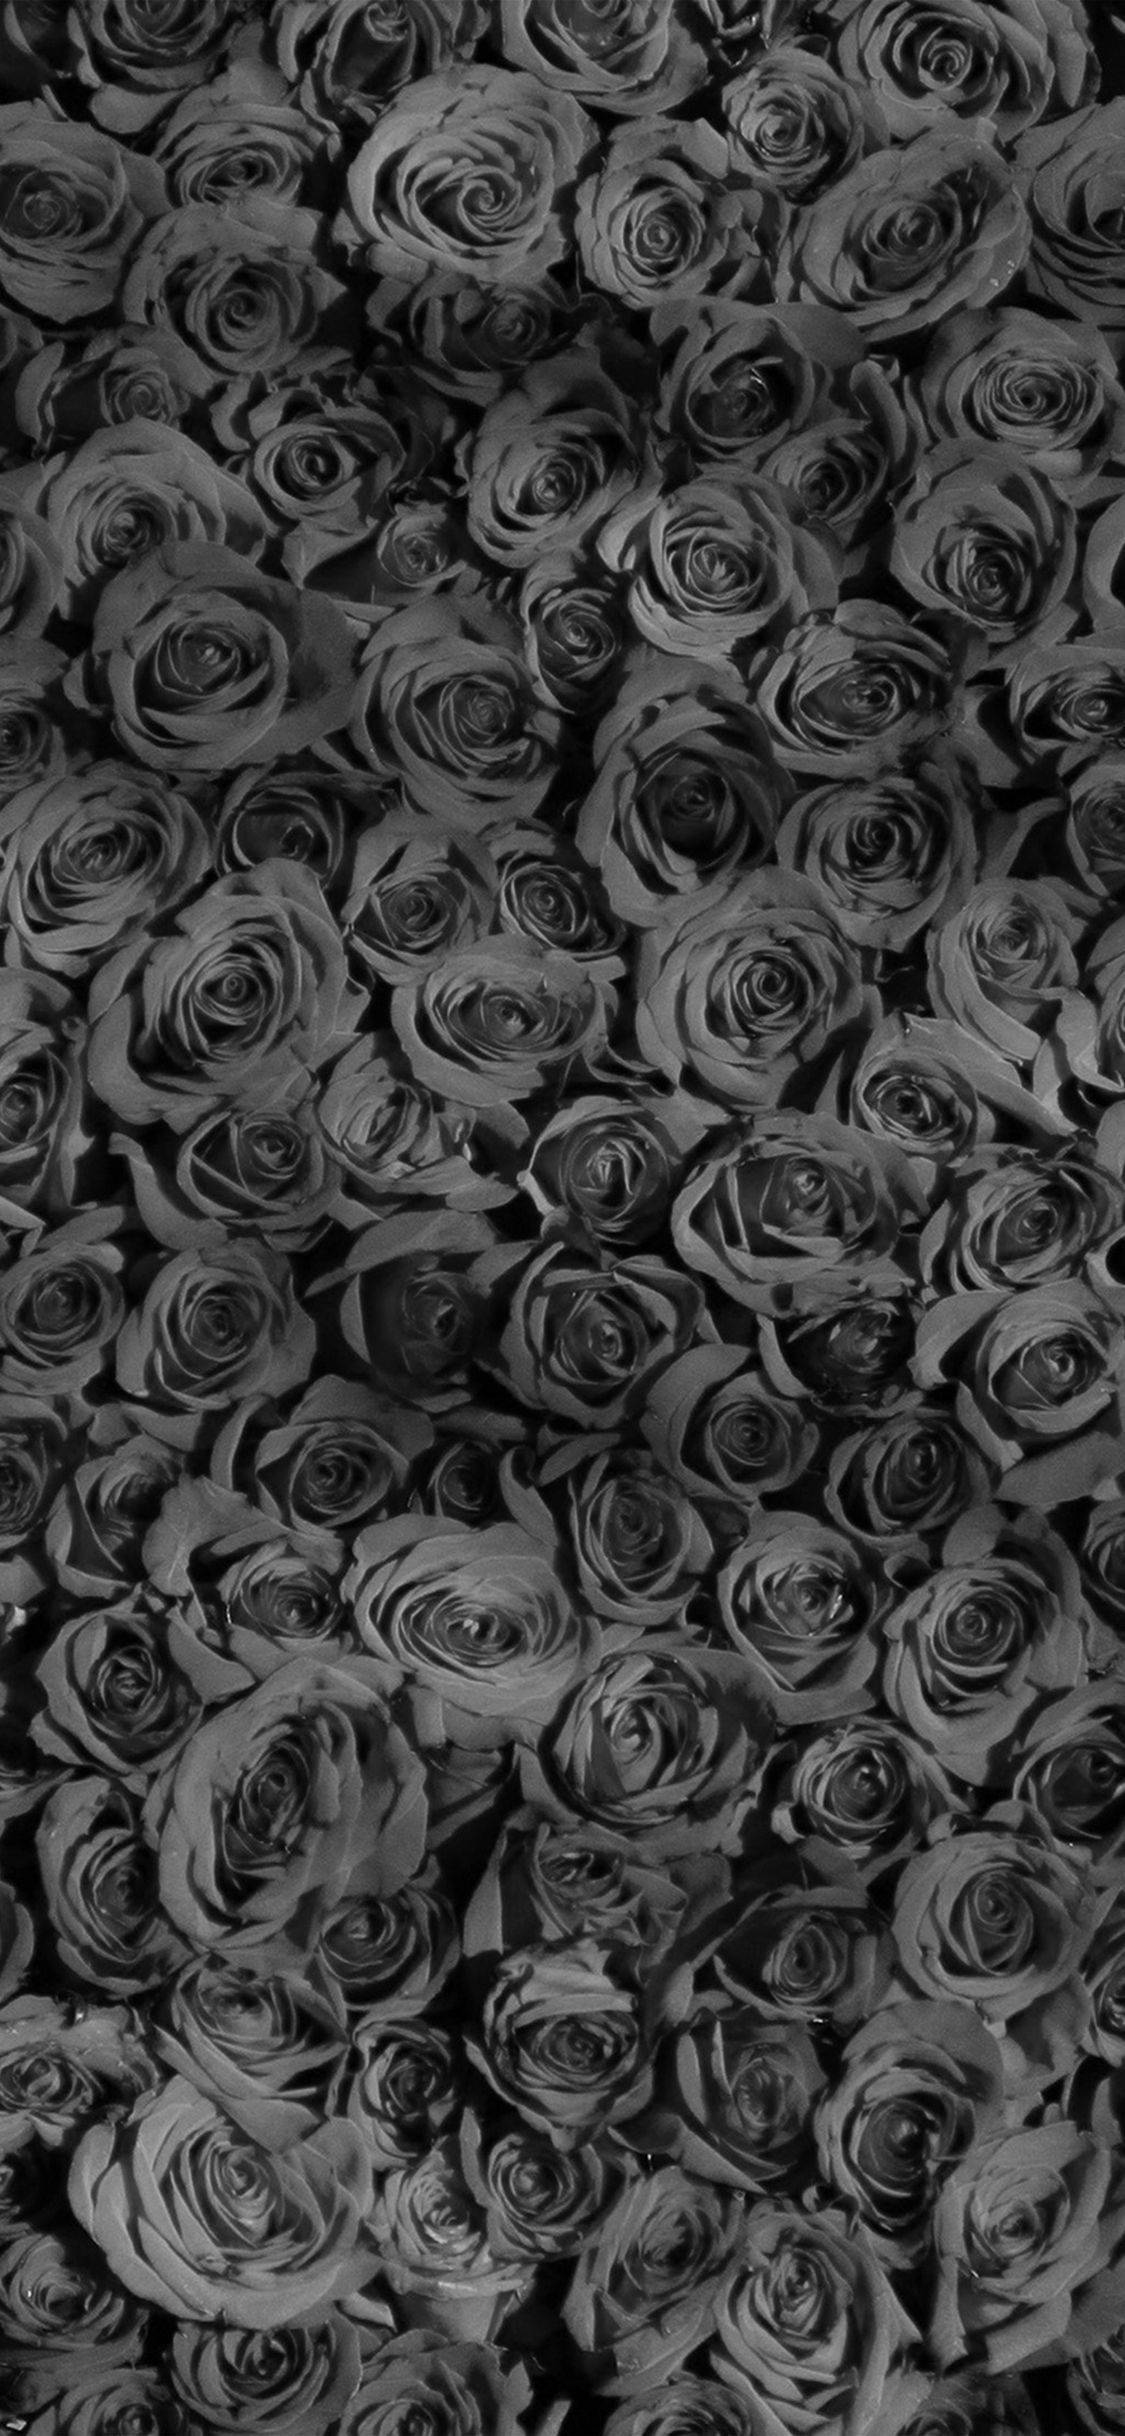 Stunning Wall Of Black Rose Iphone Background